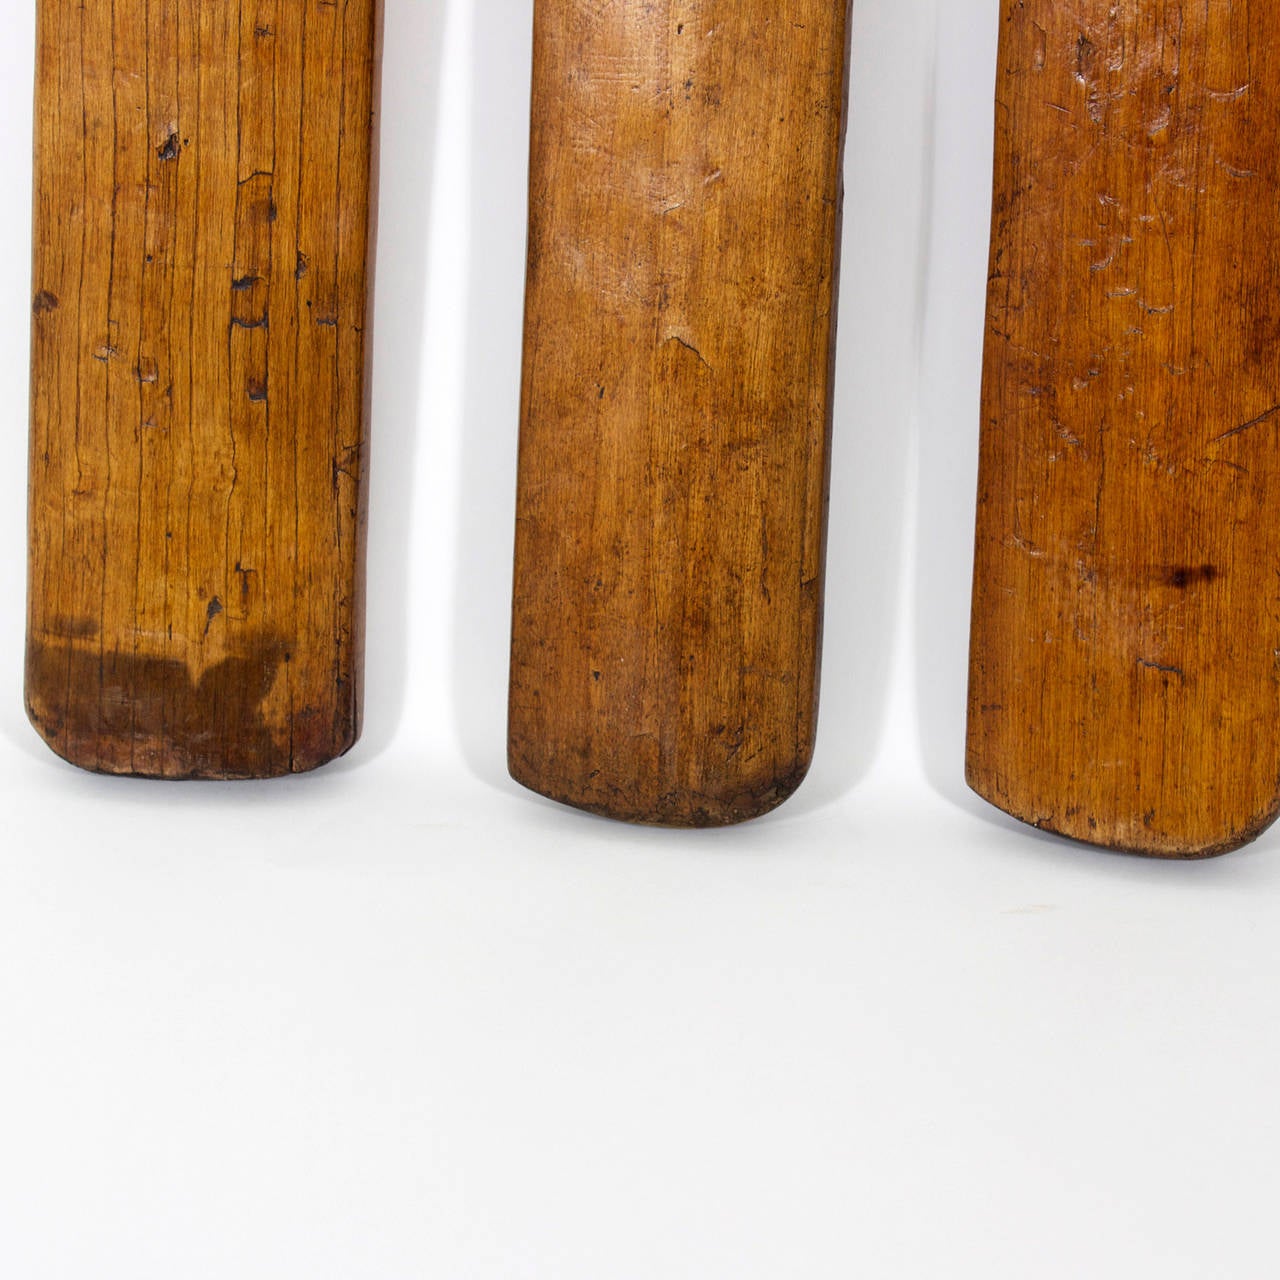 Collection of Fvie Cricket Bats, Great Color and Patina 4